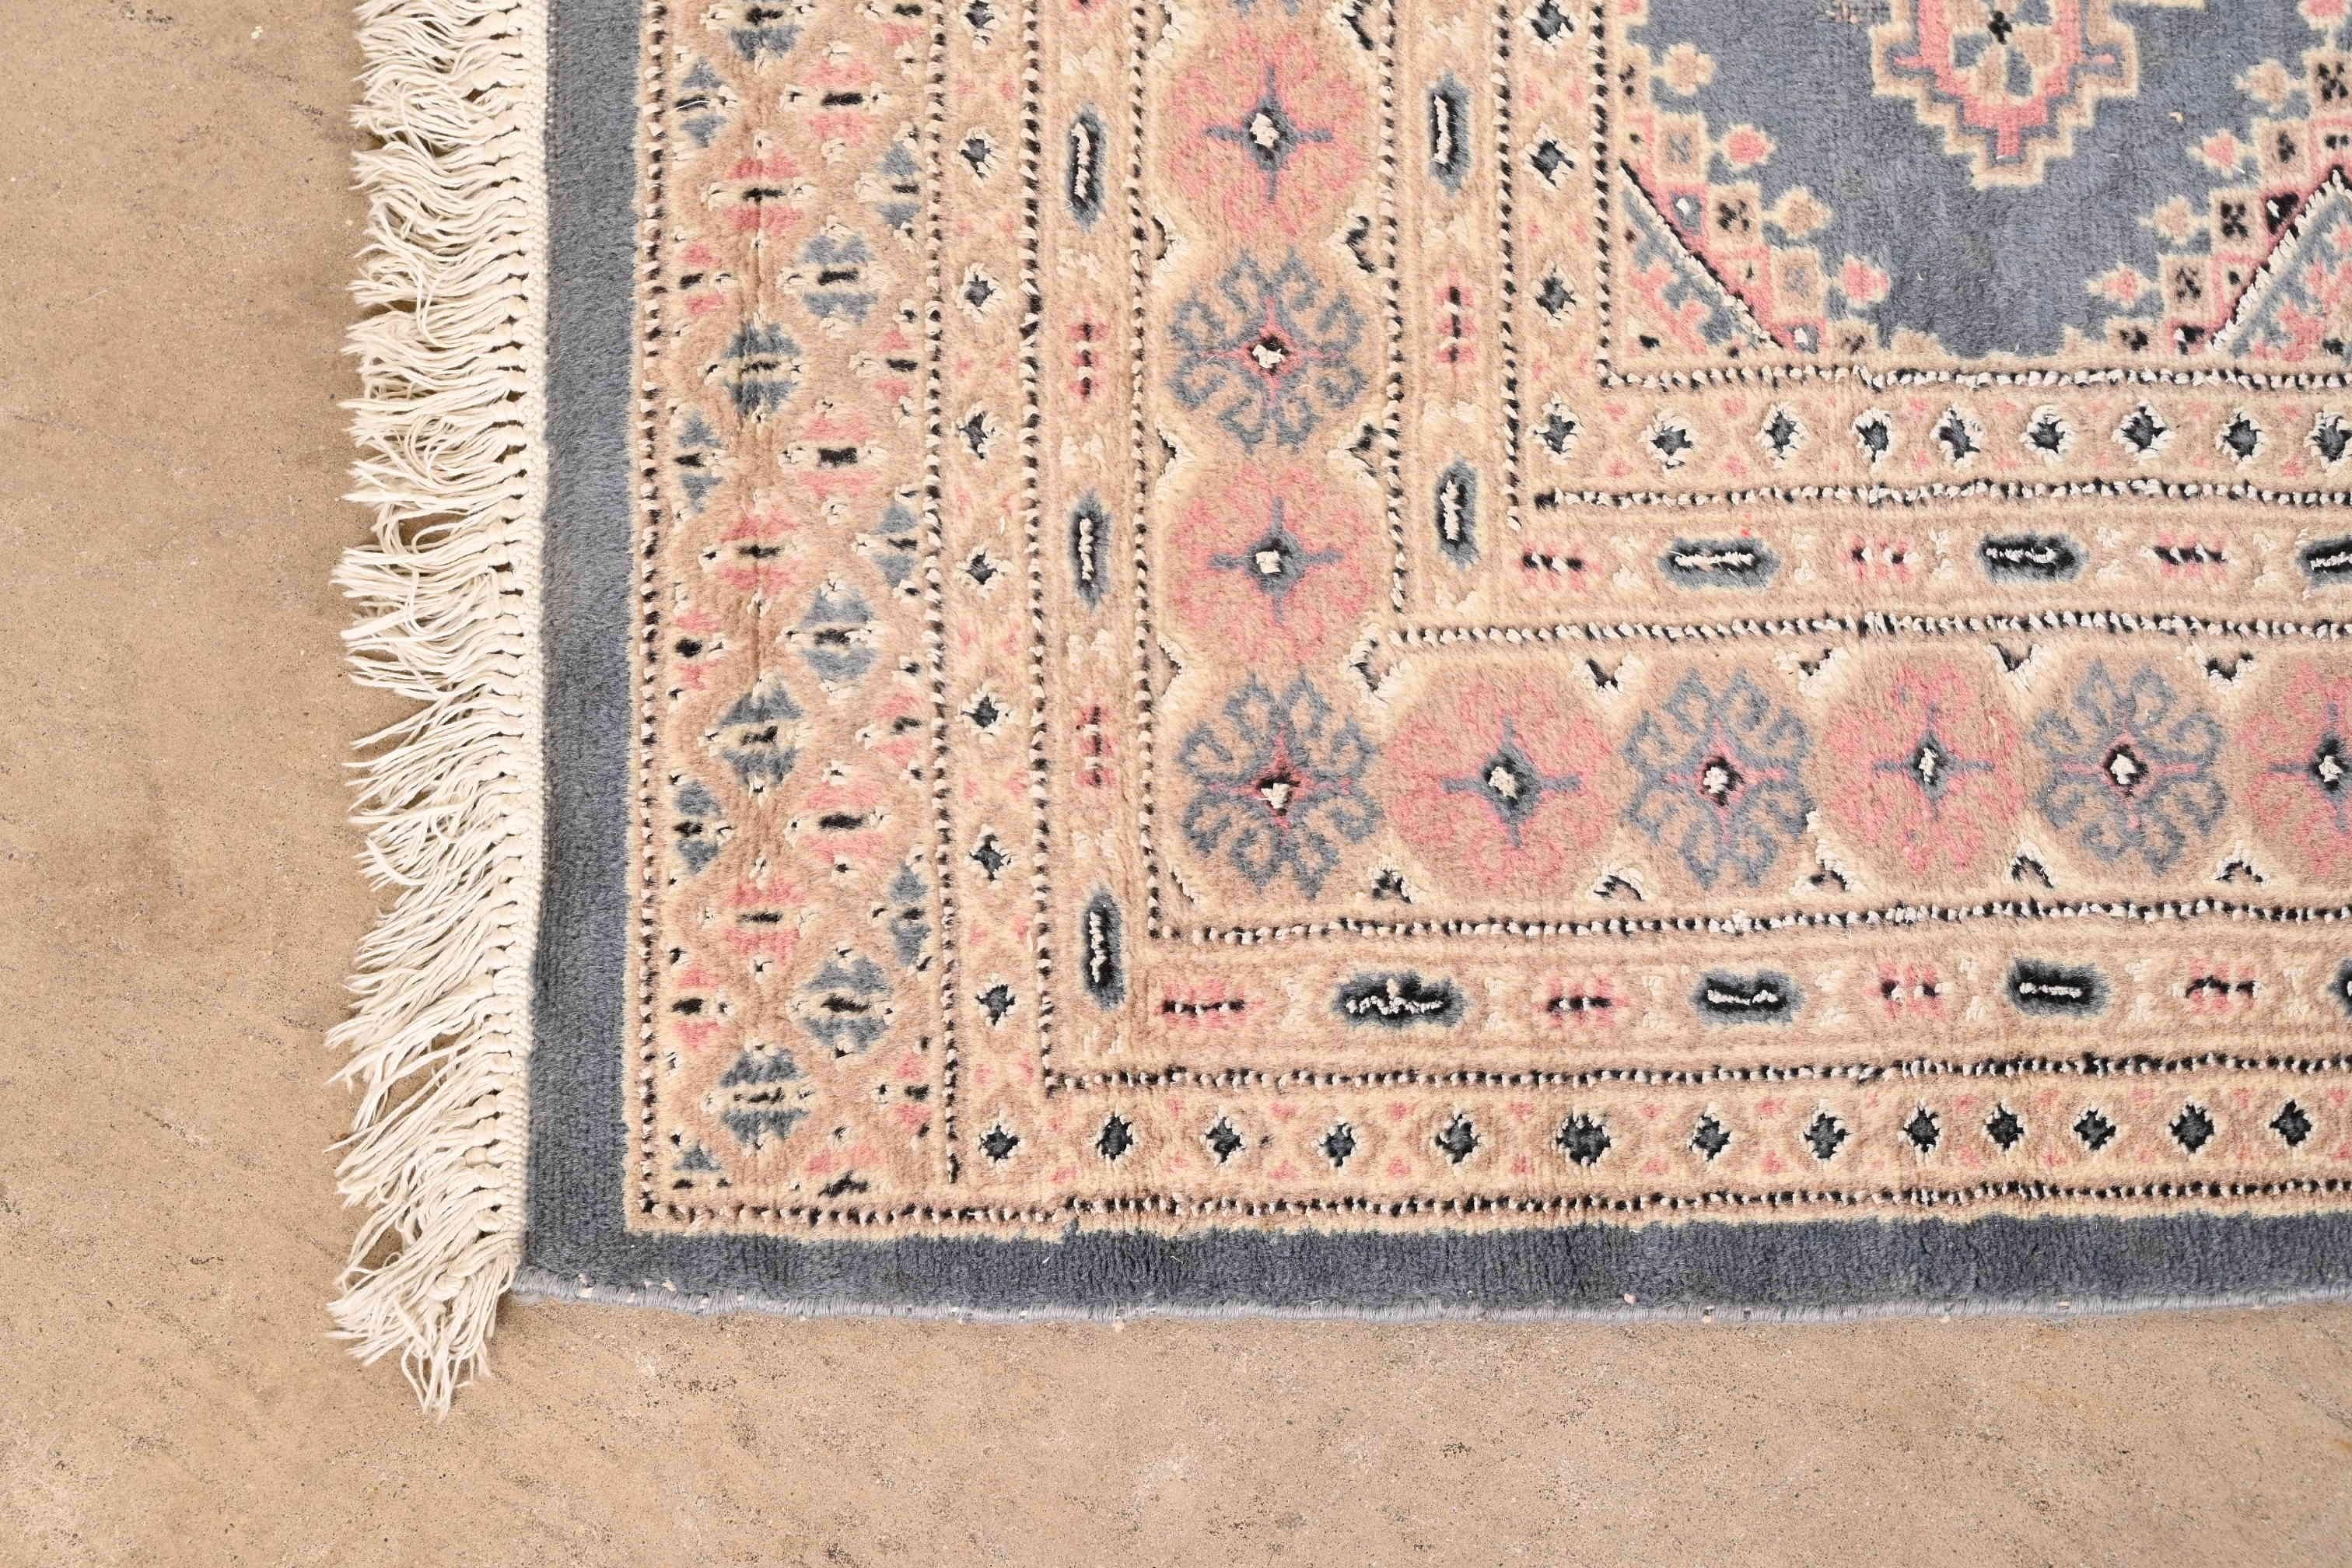 Vintage Hand-Woven Persian Bokhara Wool Rug in Light Blue, Pink, and Cream 1